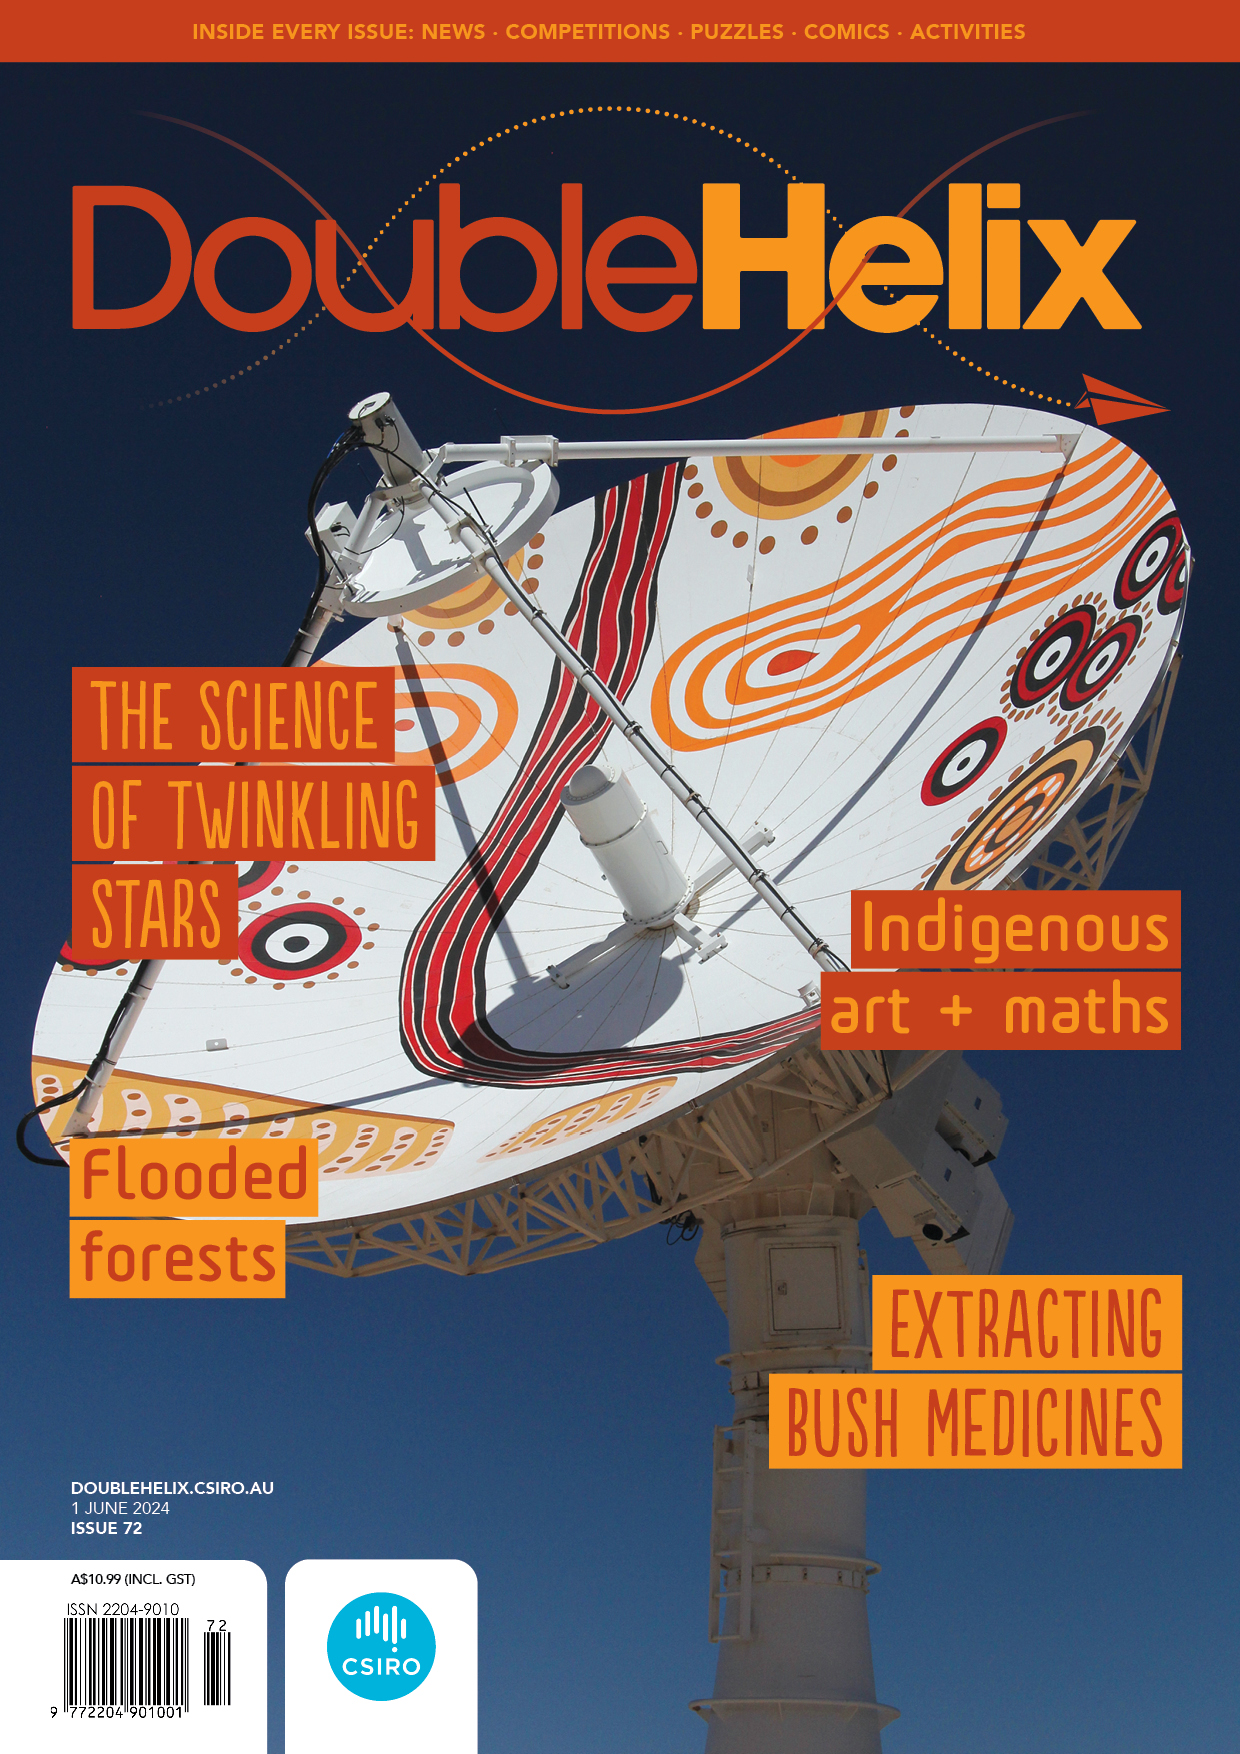 Double Helix #72 cover featuring a radio telescope dish painted in aboriginal design of ochre coloured dots and stripes